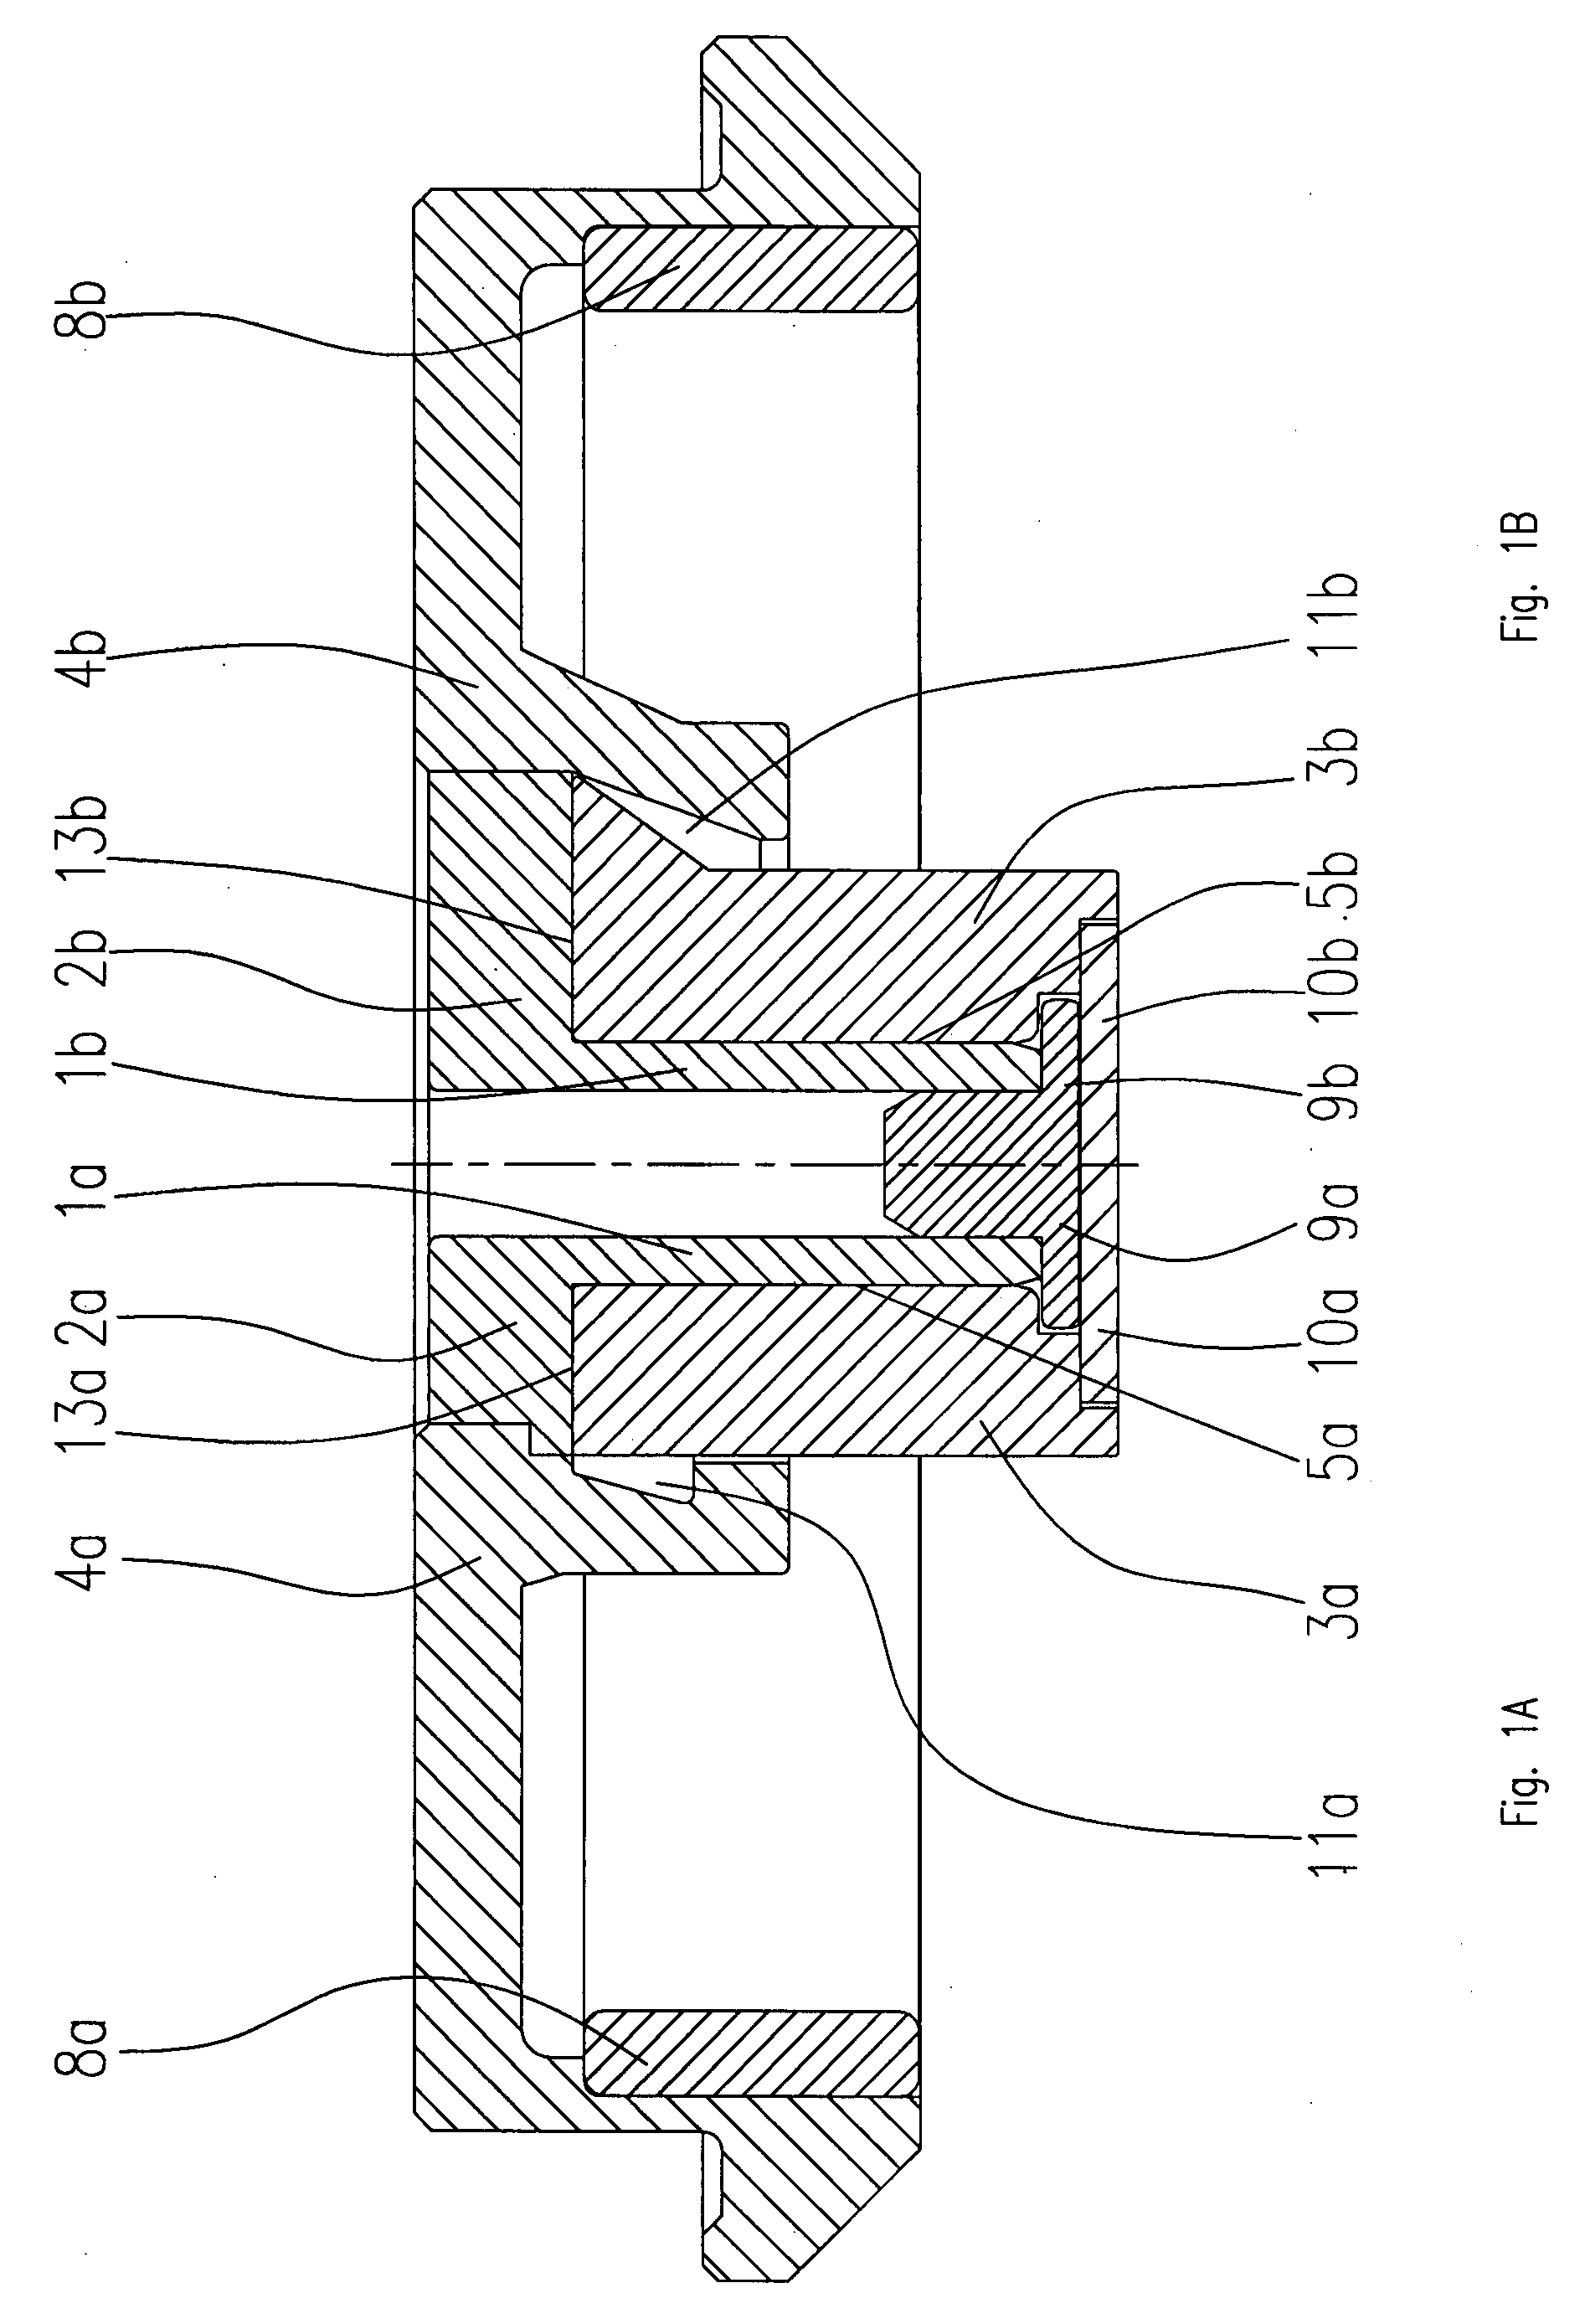 Spindle motor having a fluid dynamic bearing system